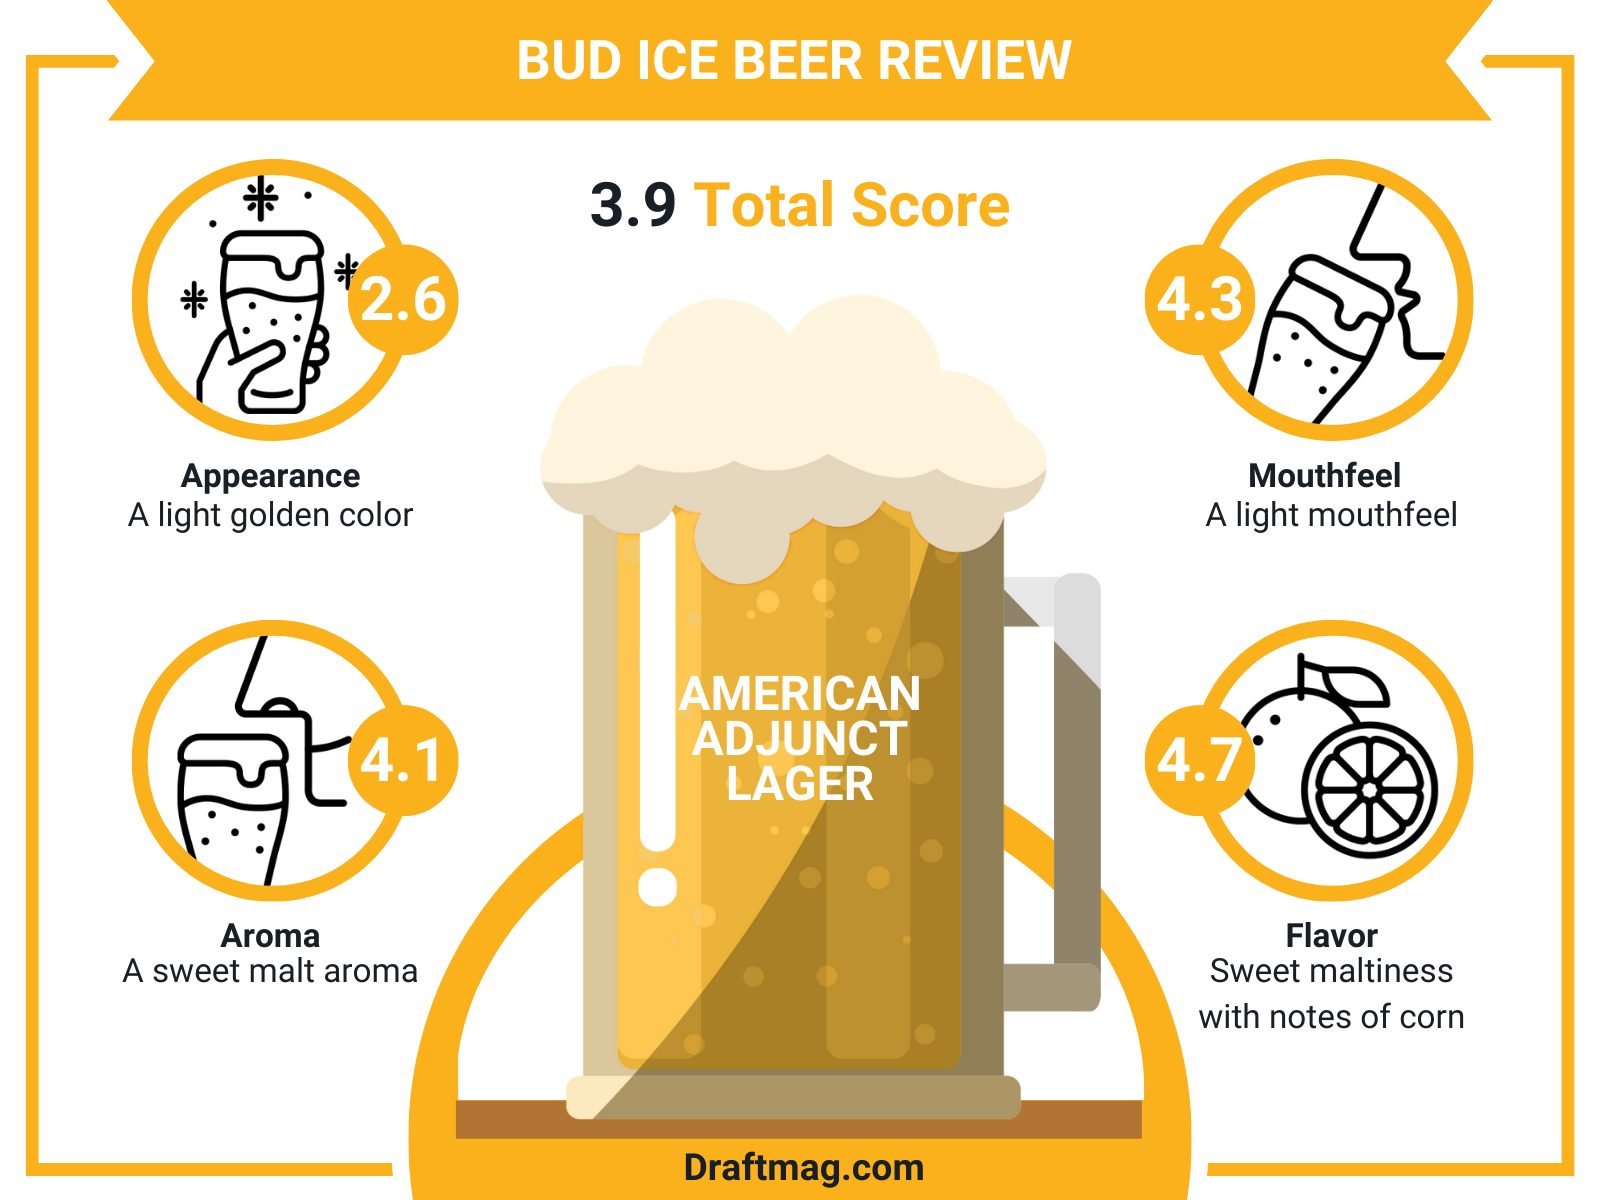 Bud Ice Beer Review Infographic